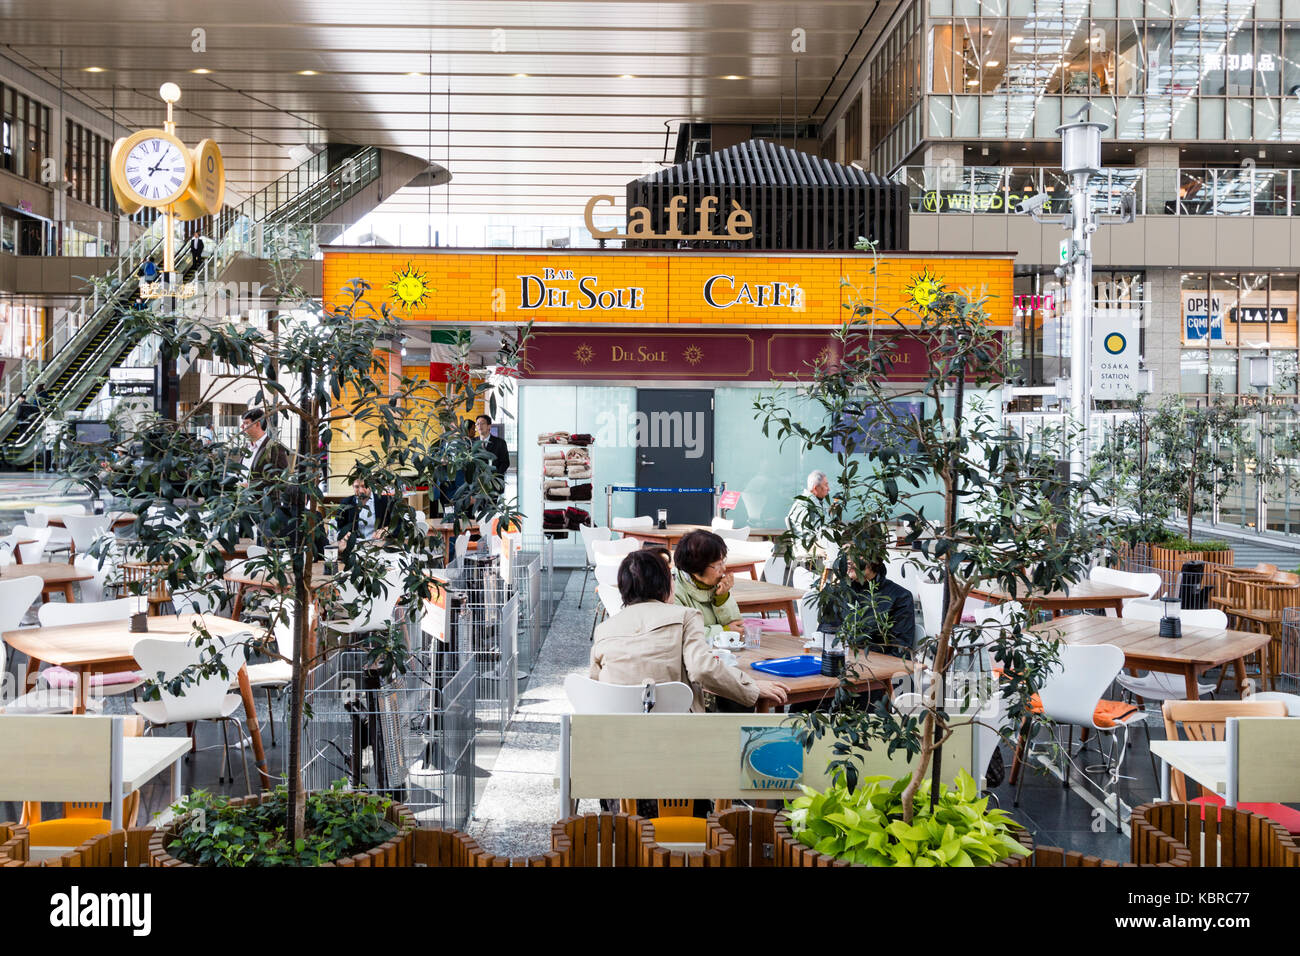 Japan, Osaka, Umeda. Osaka station city, interior, Del Sole cafe bar on main upper concourse. People sitting at tables, drinking and chatting.. Stock Photo